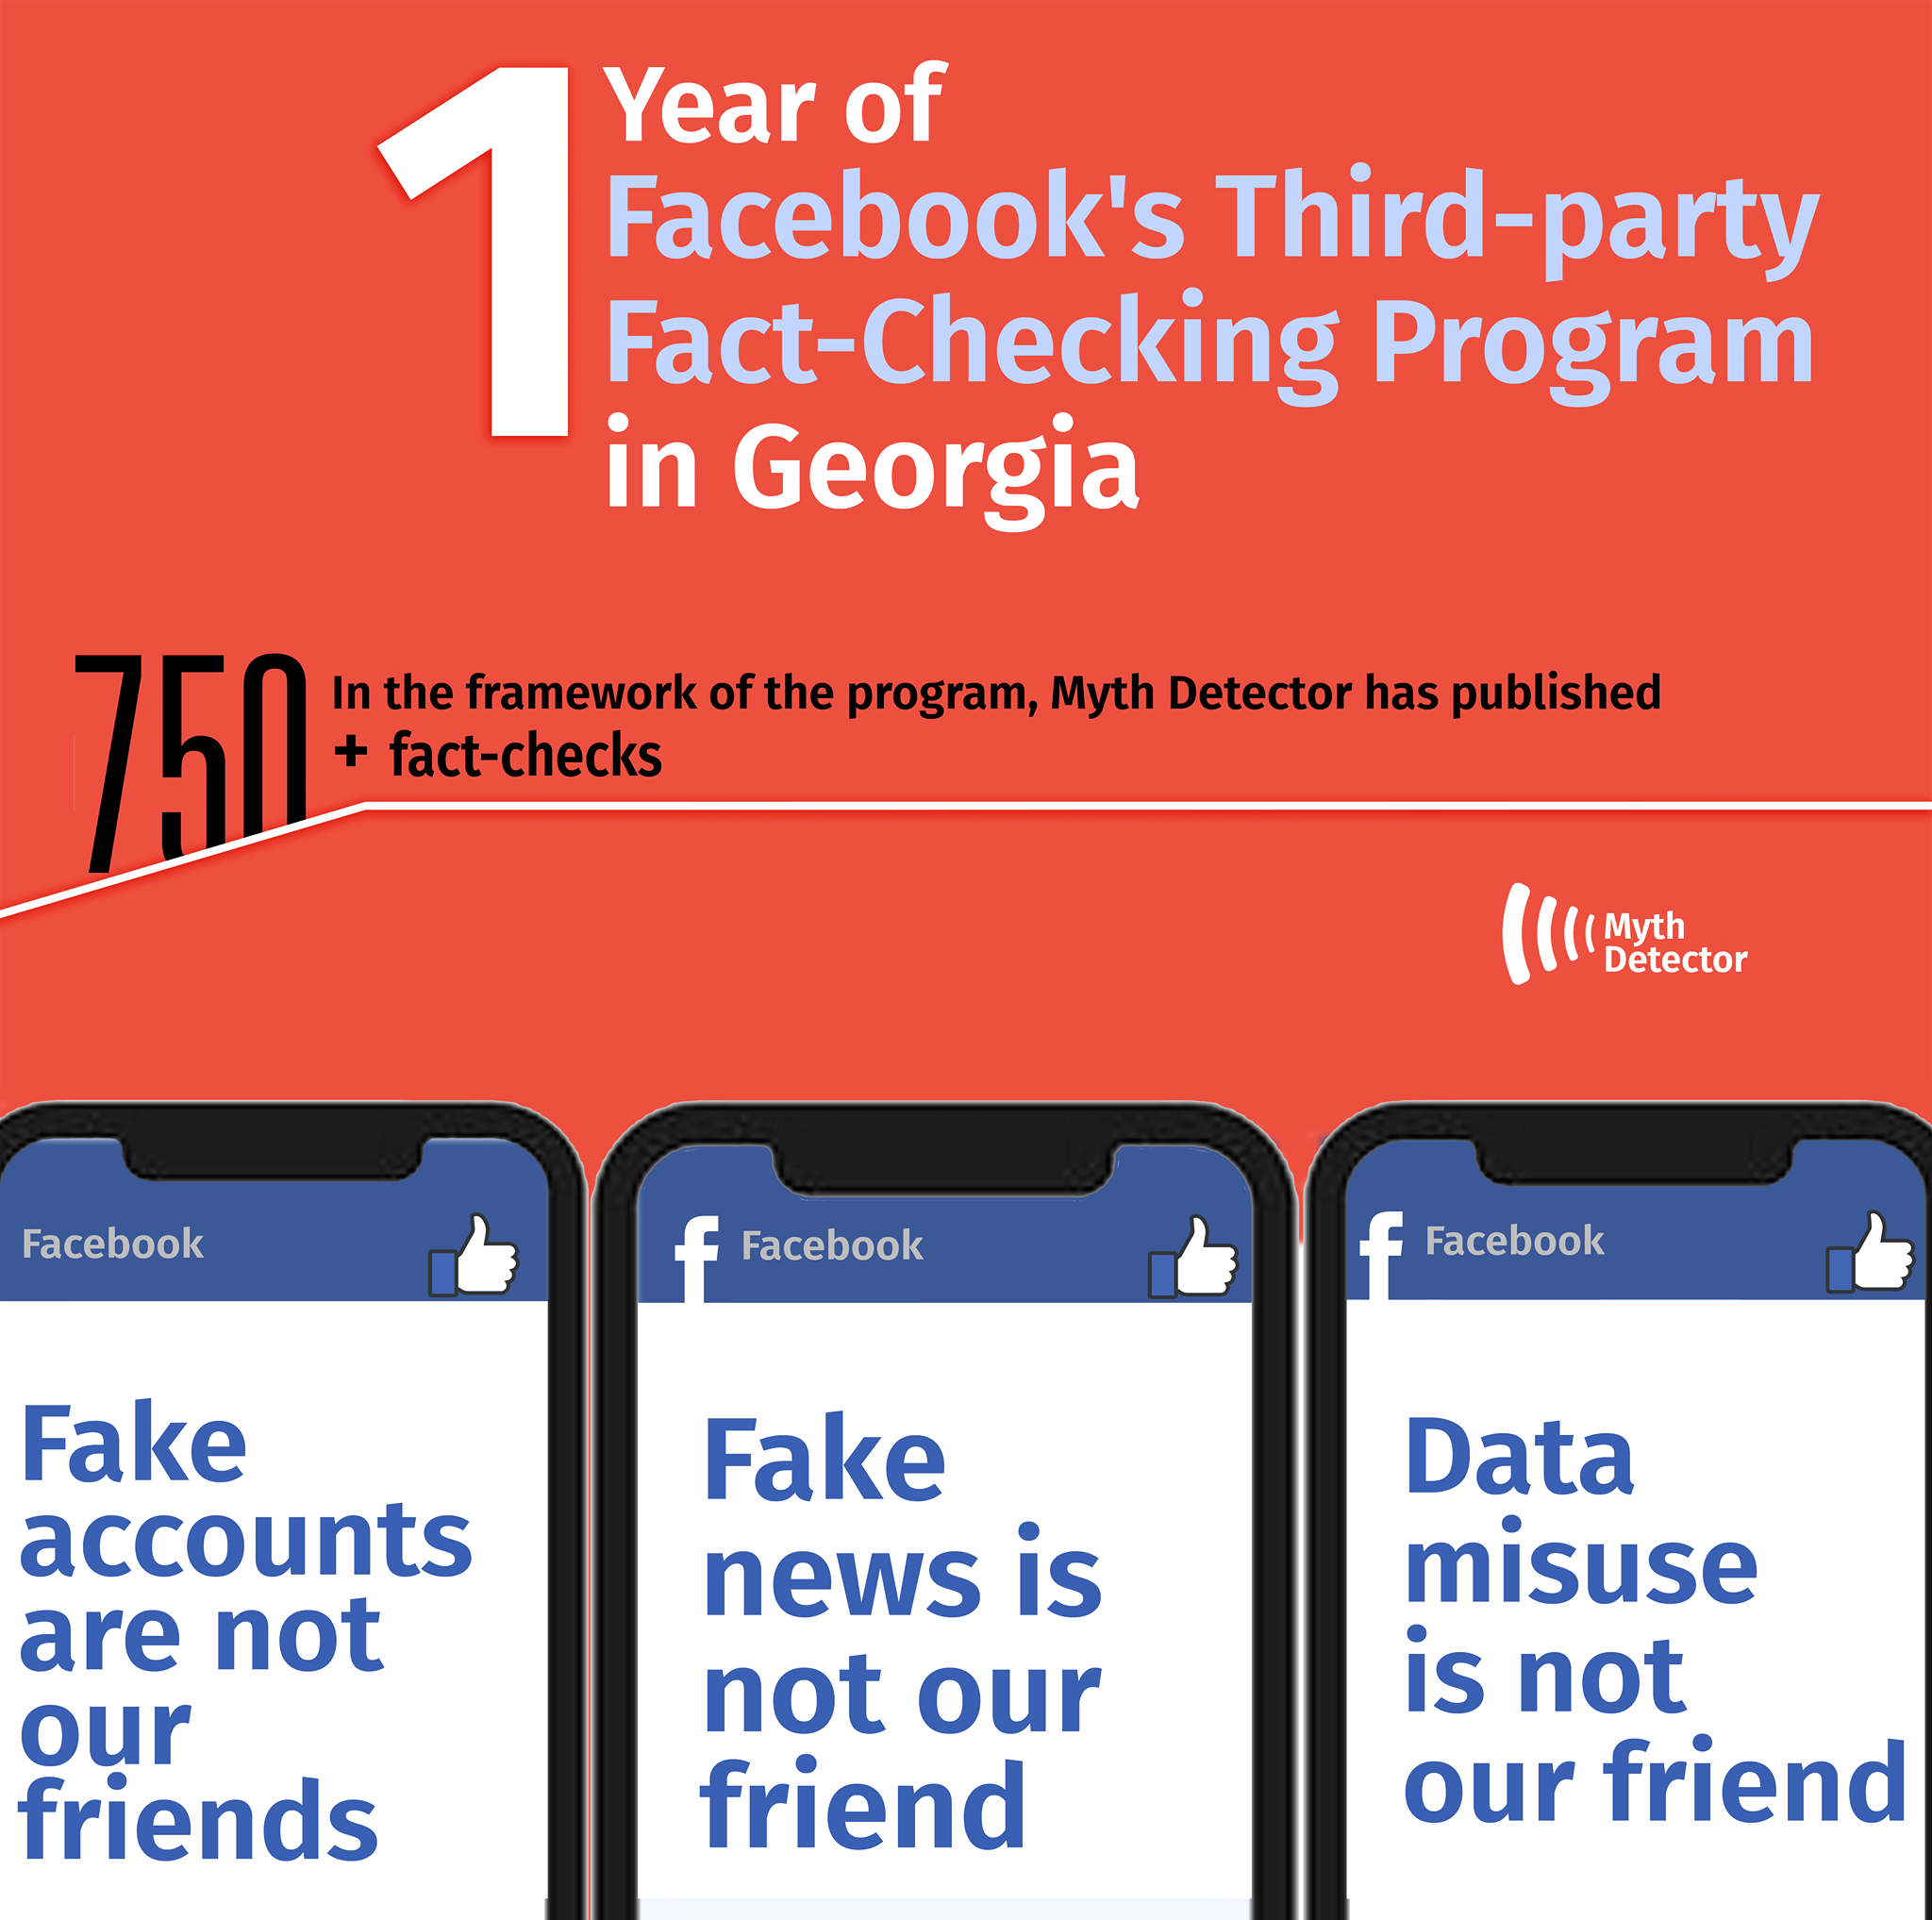 1 Year of Facebook’s Third-party Fact-Checking Program in Georgia